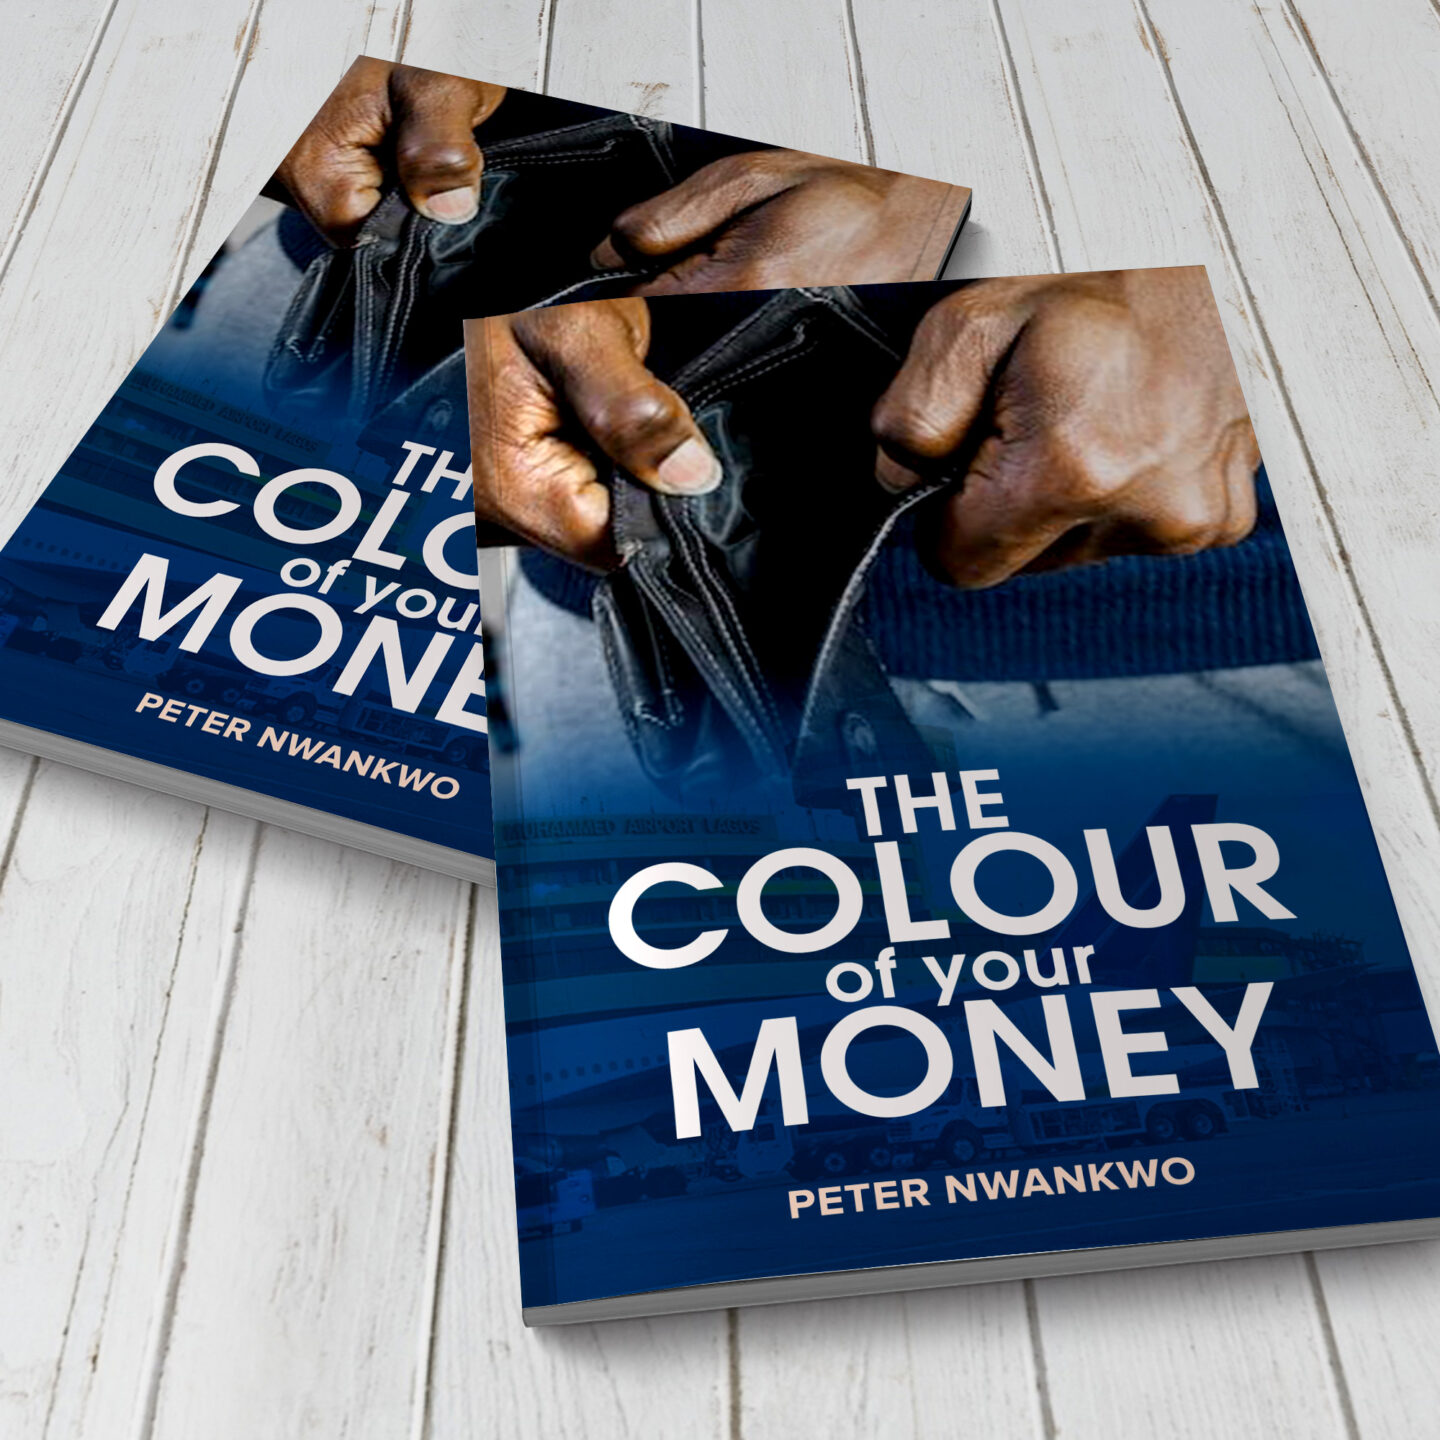 WHAT IS THE COLOUR OF YOUR MONEY?